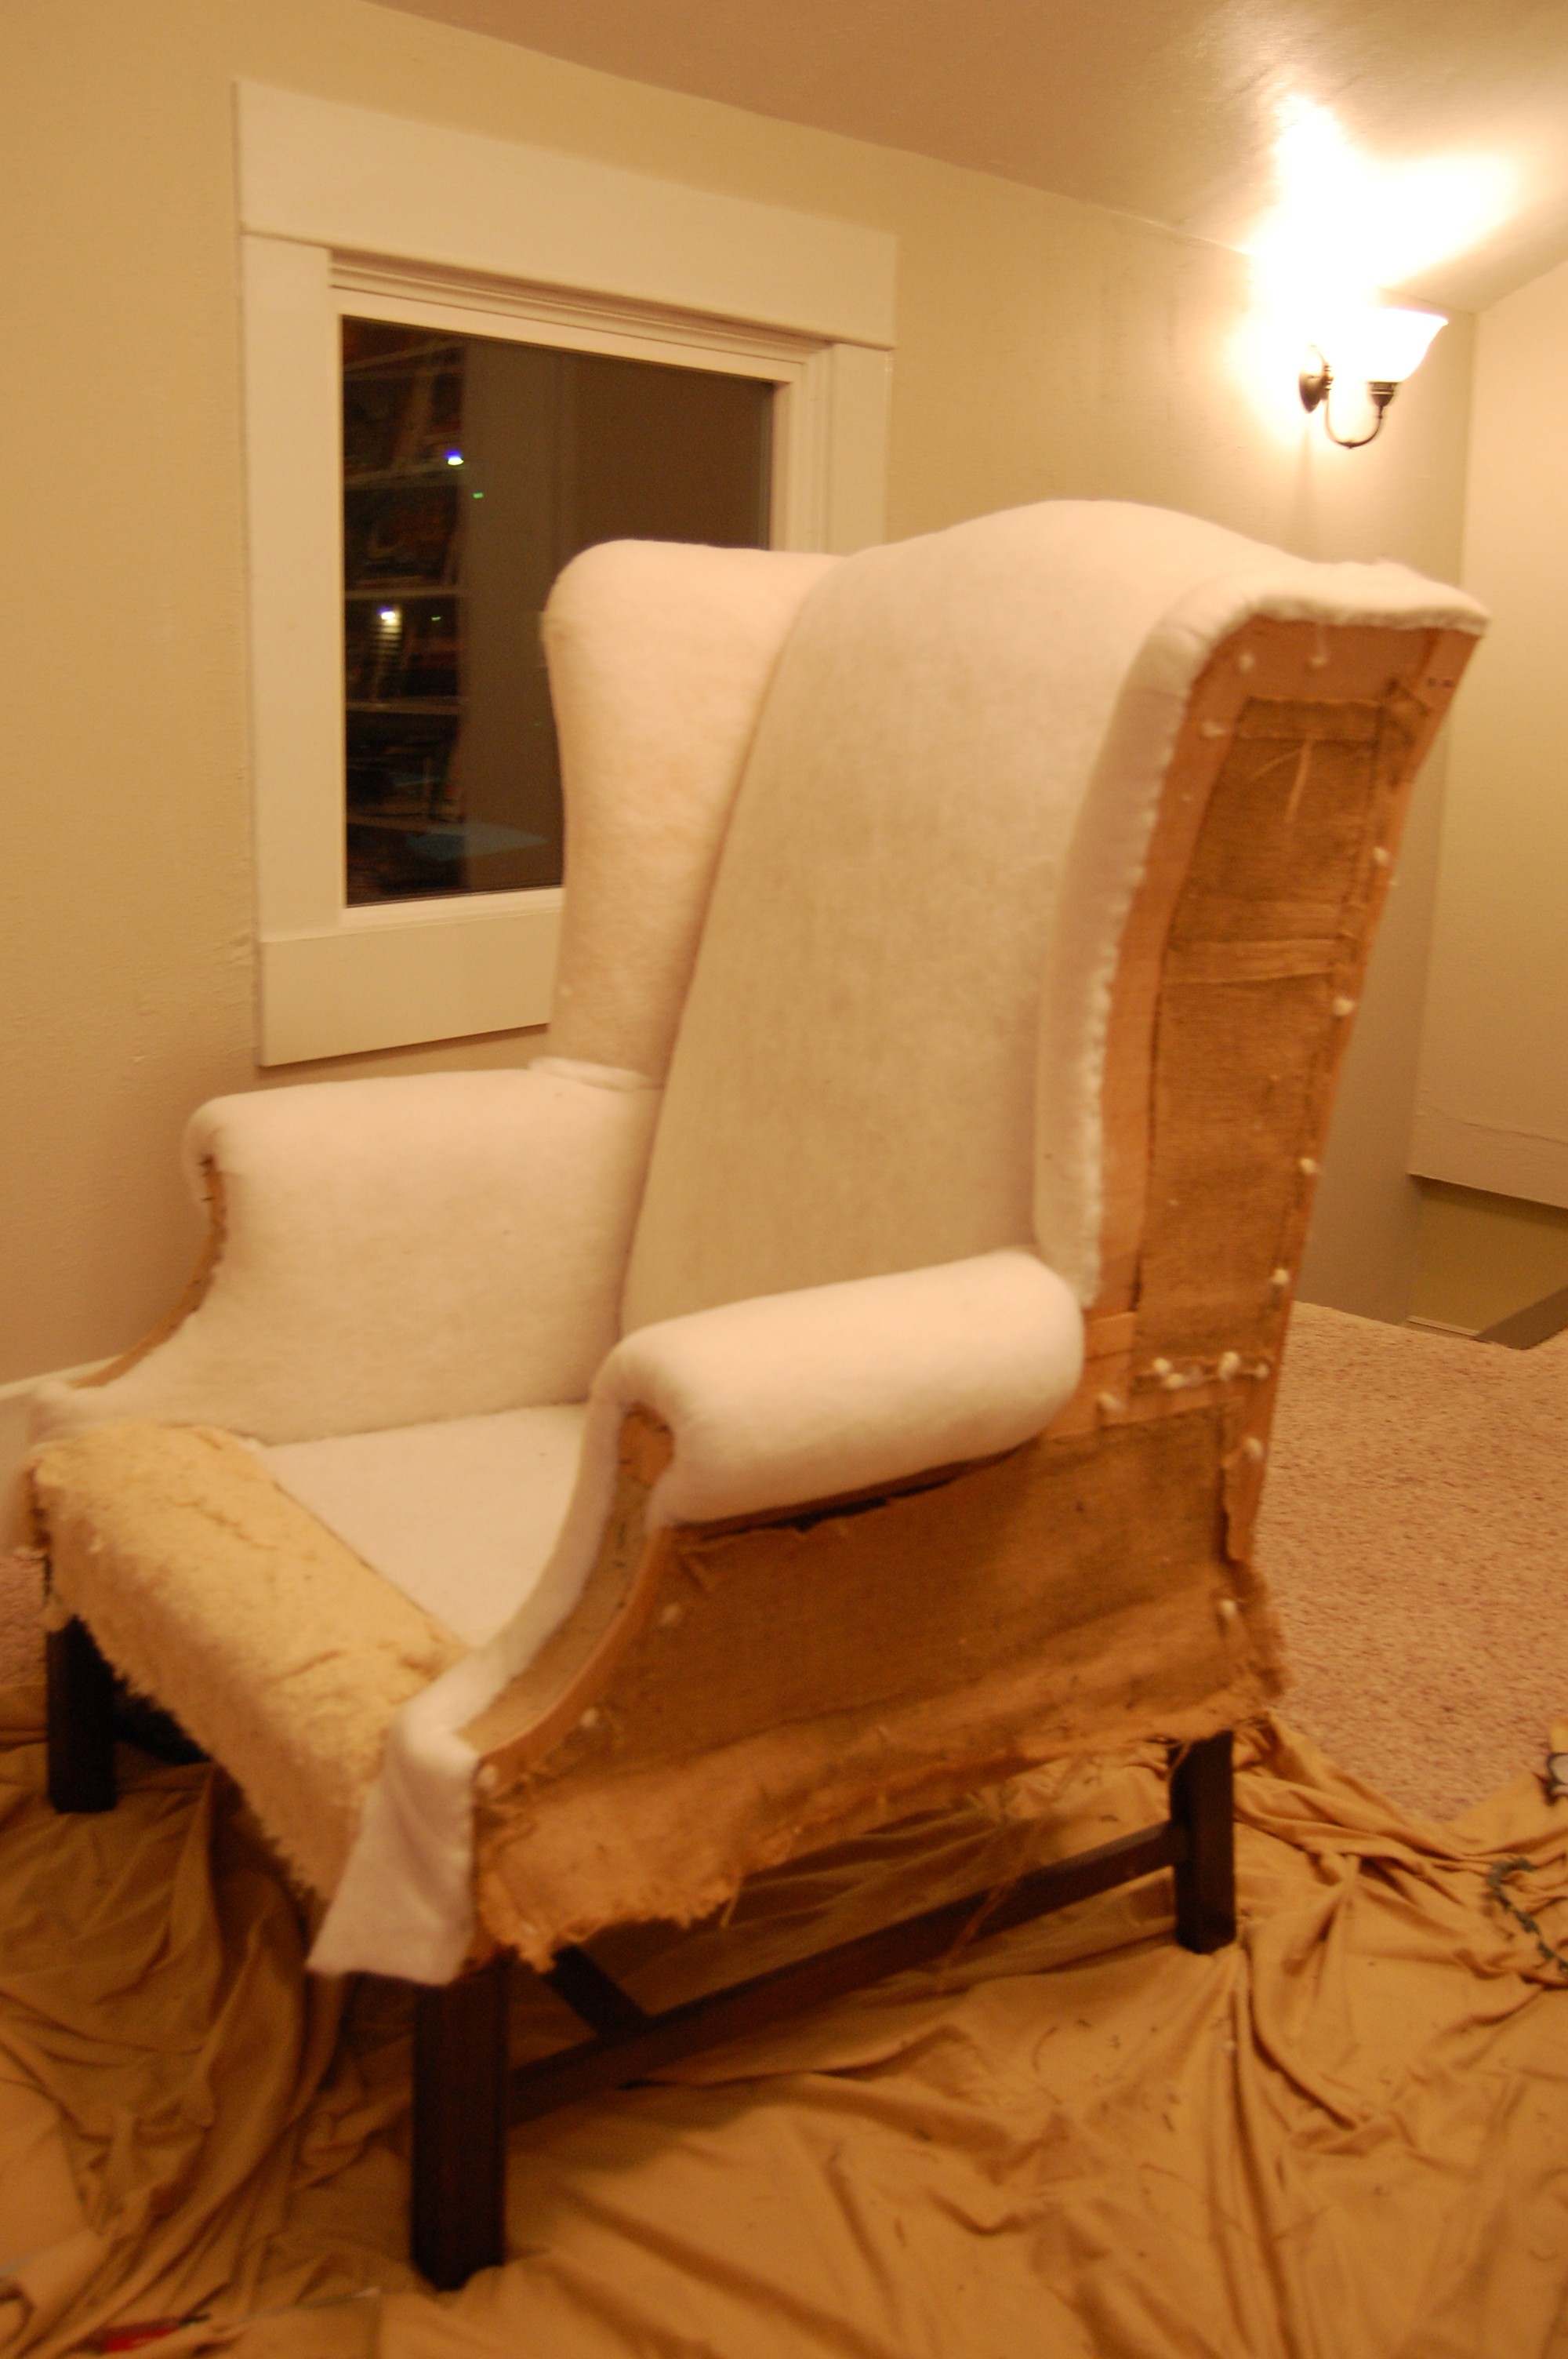 How To Reupholster A Wingback Chair Diy Project Aholic